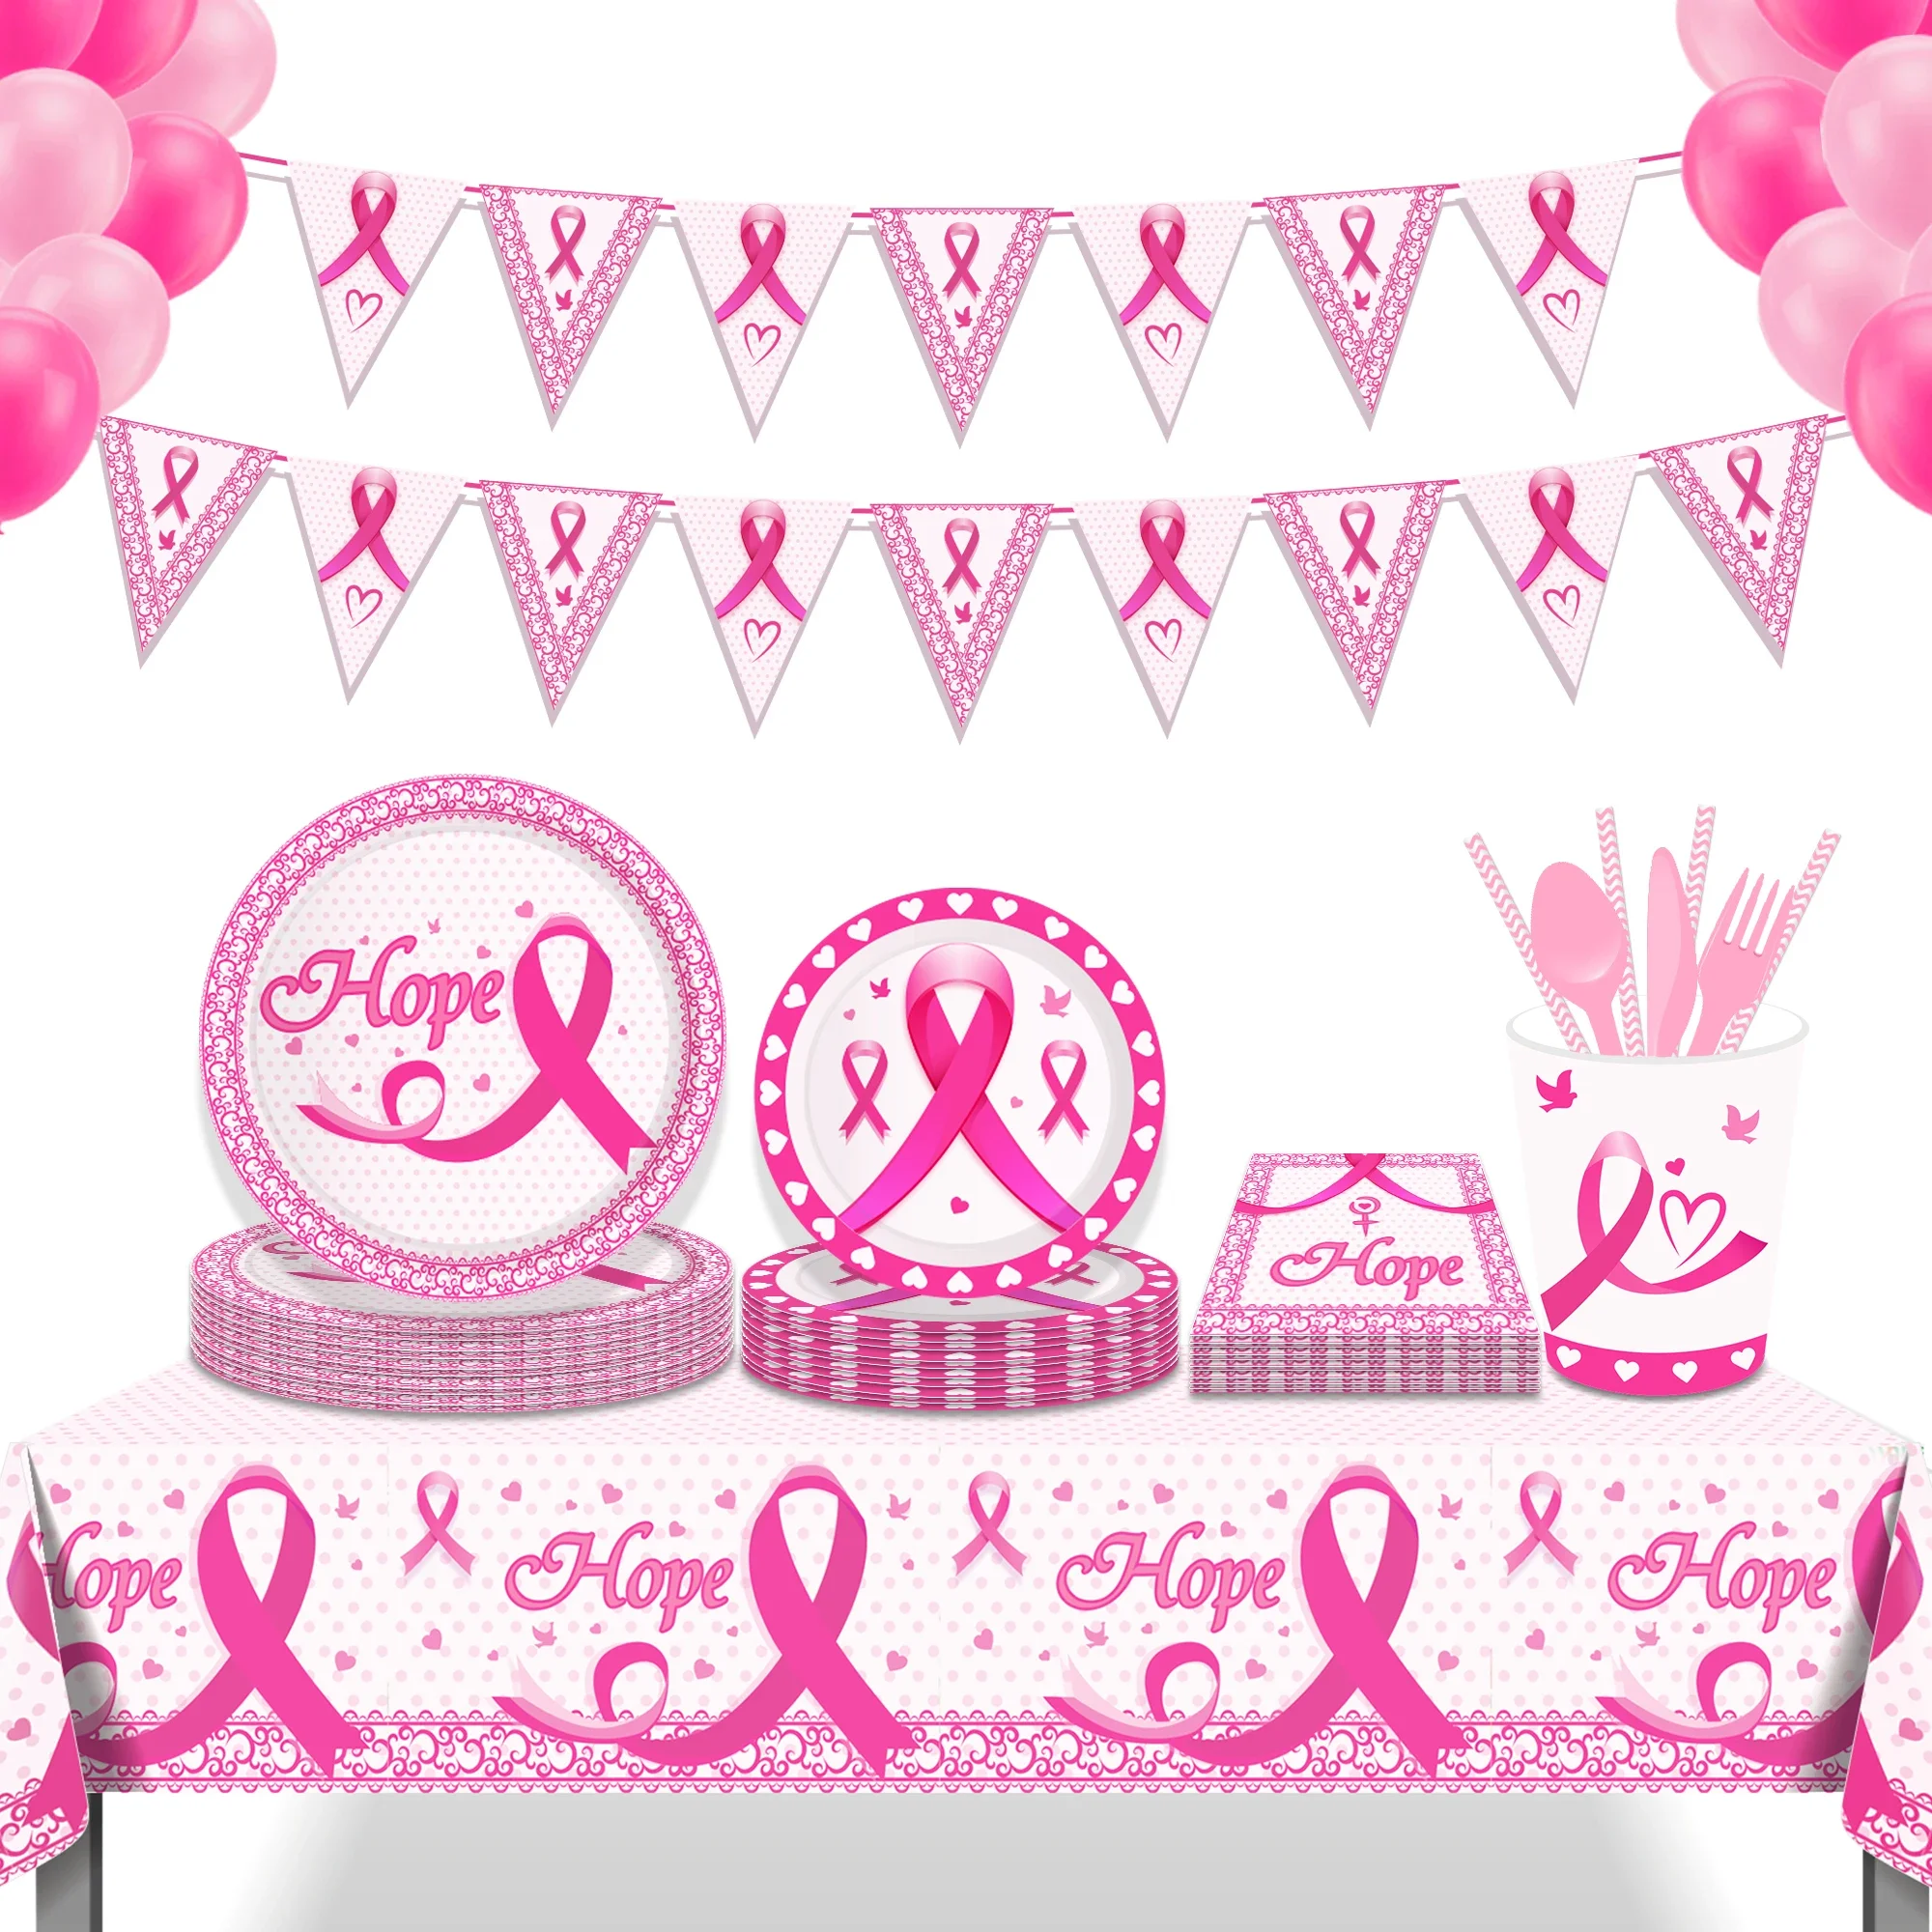 

Pink Ribbon Women Breast Cancer Awareness Month Theme Paper Disposable Tableware Sets Plates Cups Napkins Balloon Paper Straws